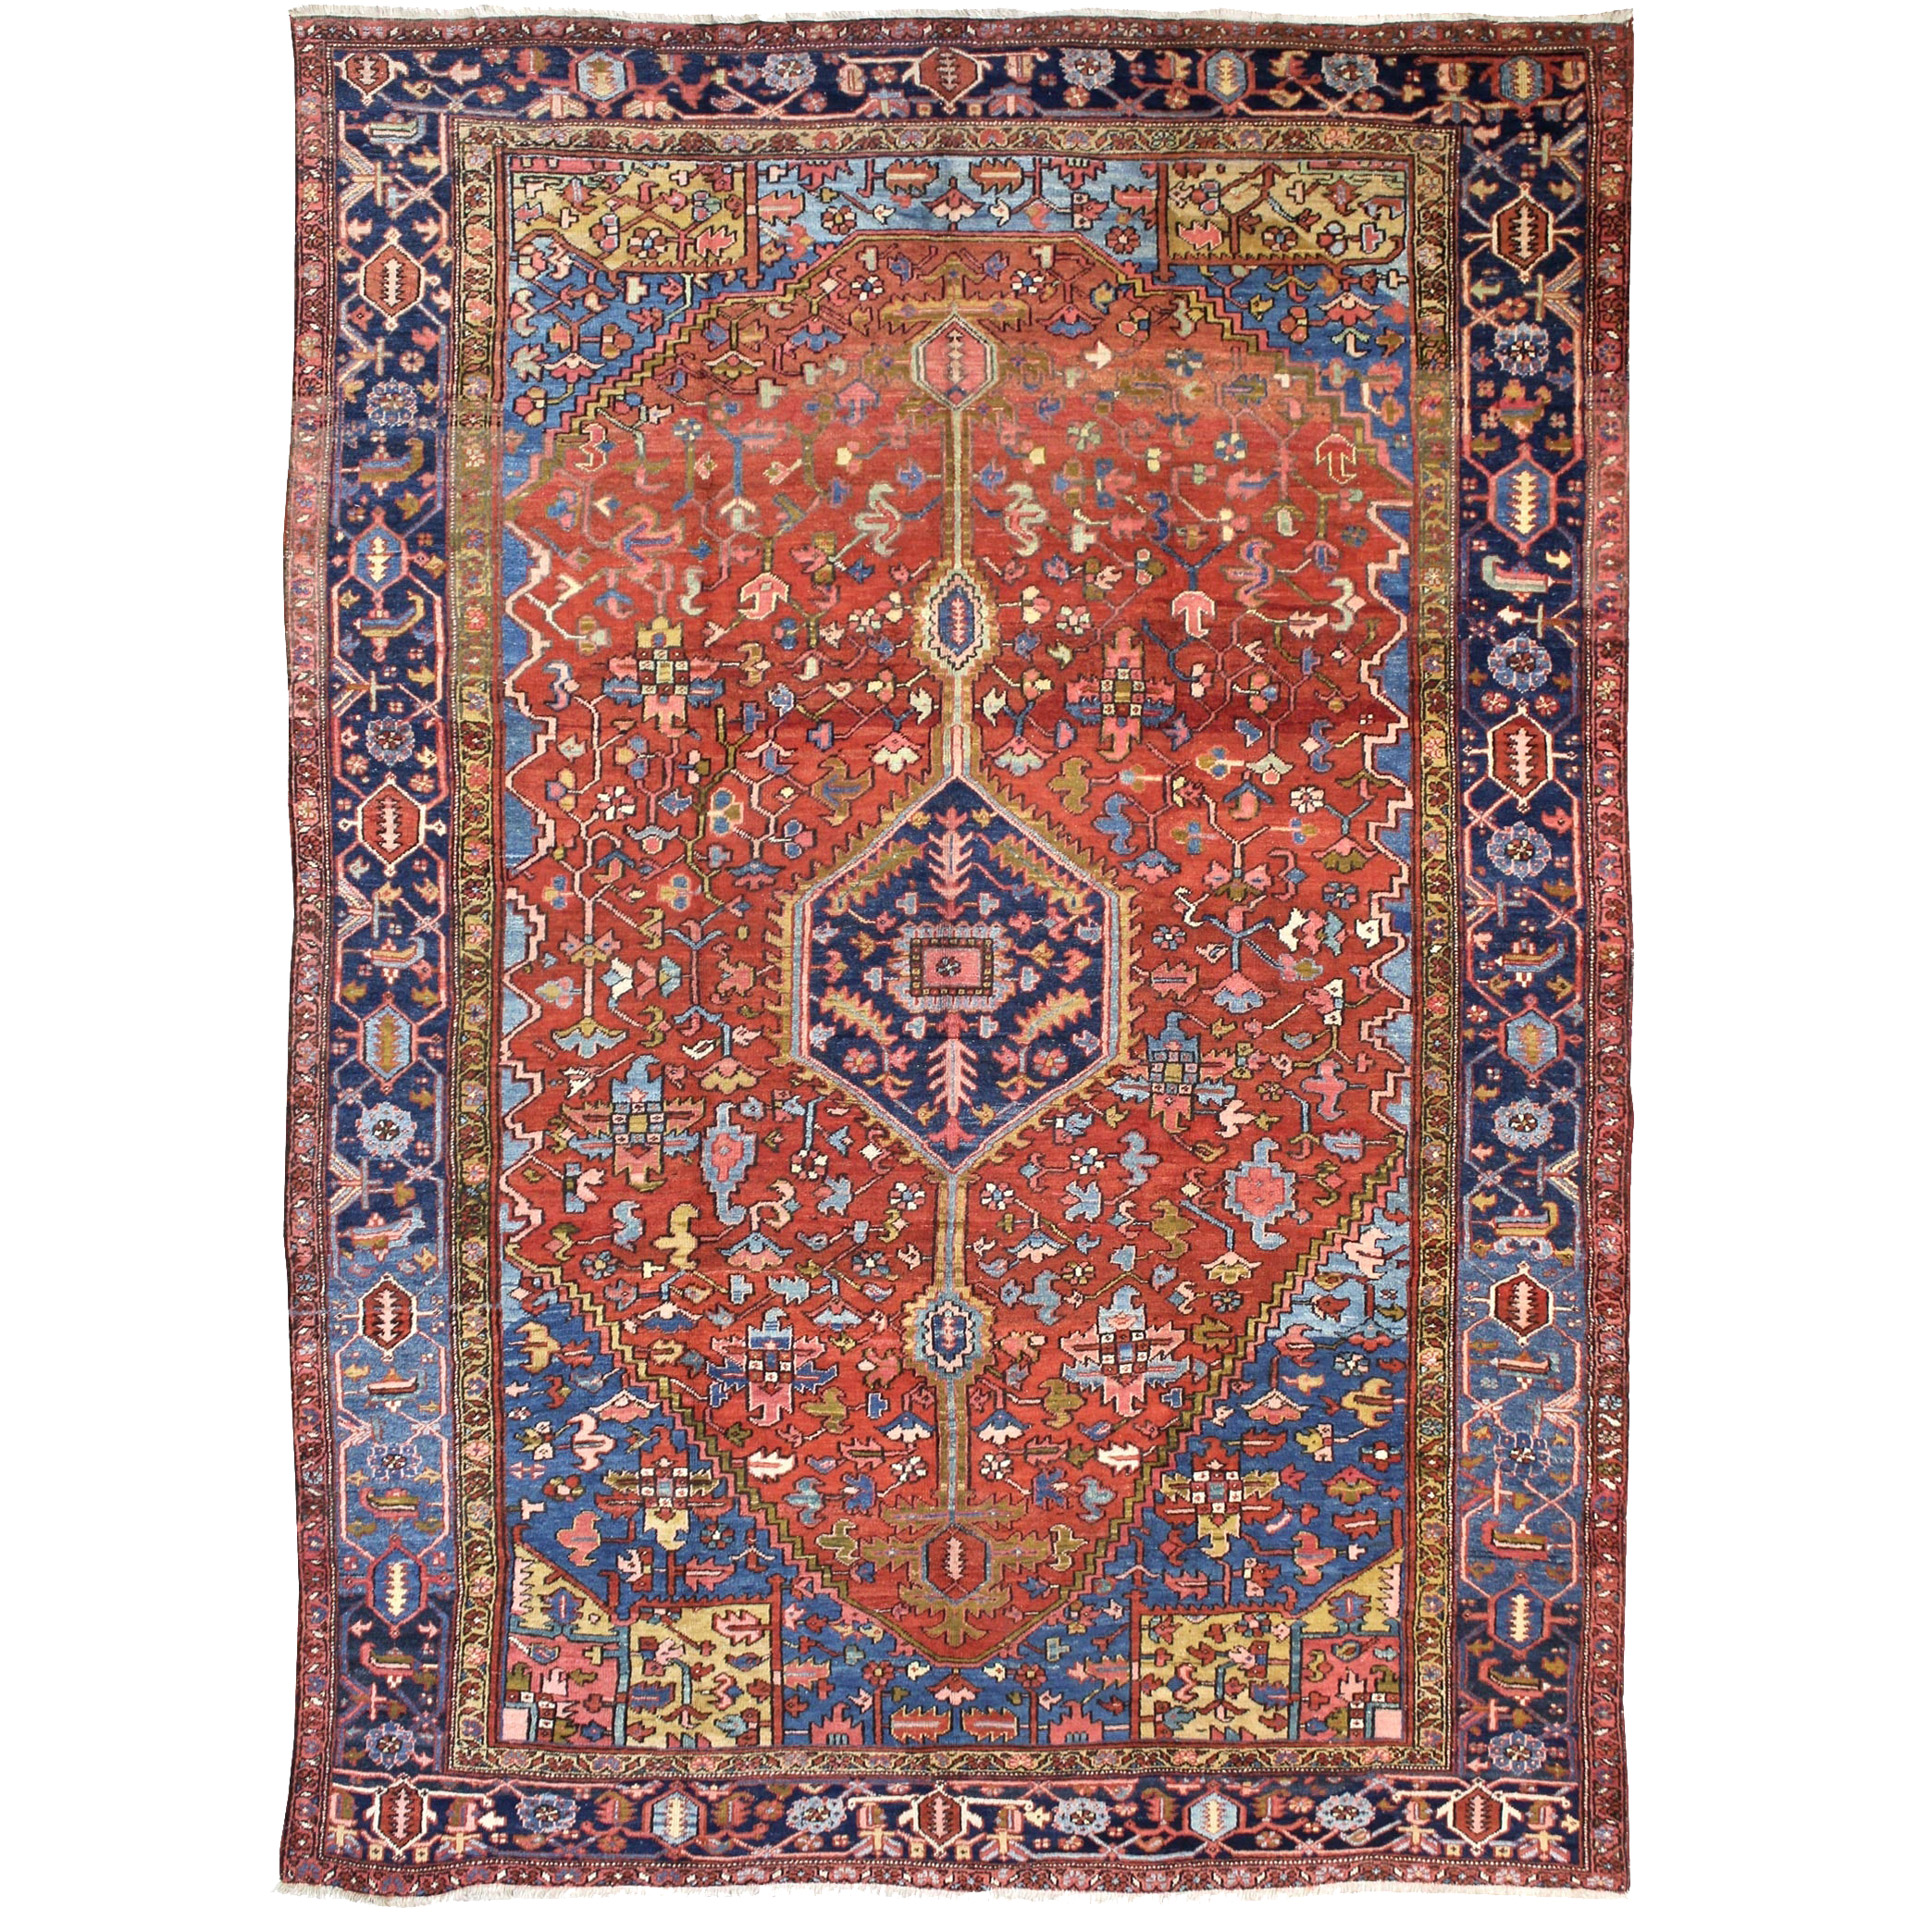 Antique Persian Heriz carpet with a small, navy blue medallion on a terra cotta color field, circa 1920, Douglas Stock Gallery, antique Oriental rugs Boston,MA area, antique carpets New England